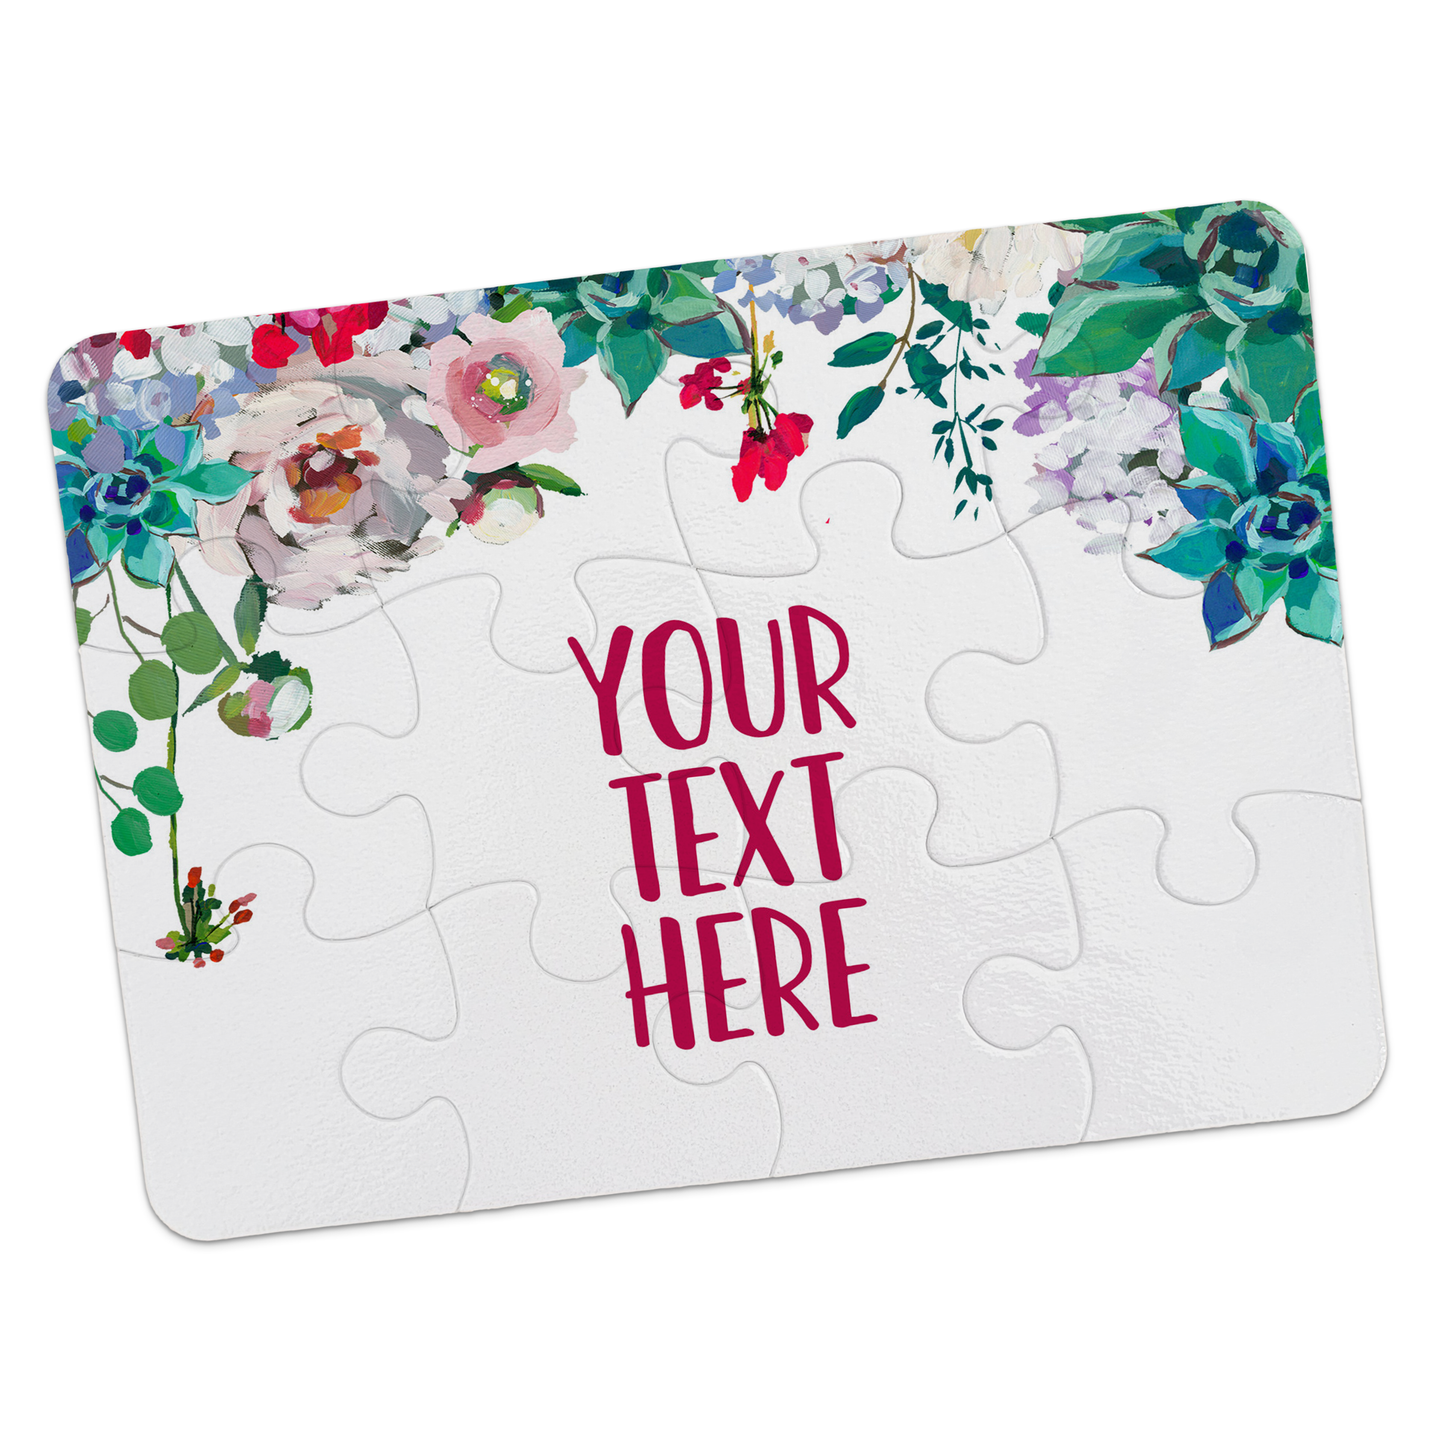 Create Your Own Puzzle - Floral Design - CYOP0158 | S'Berry Boutique